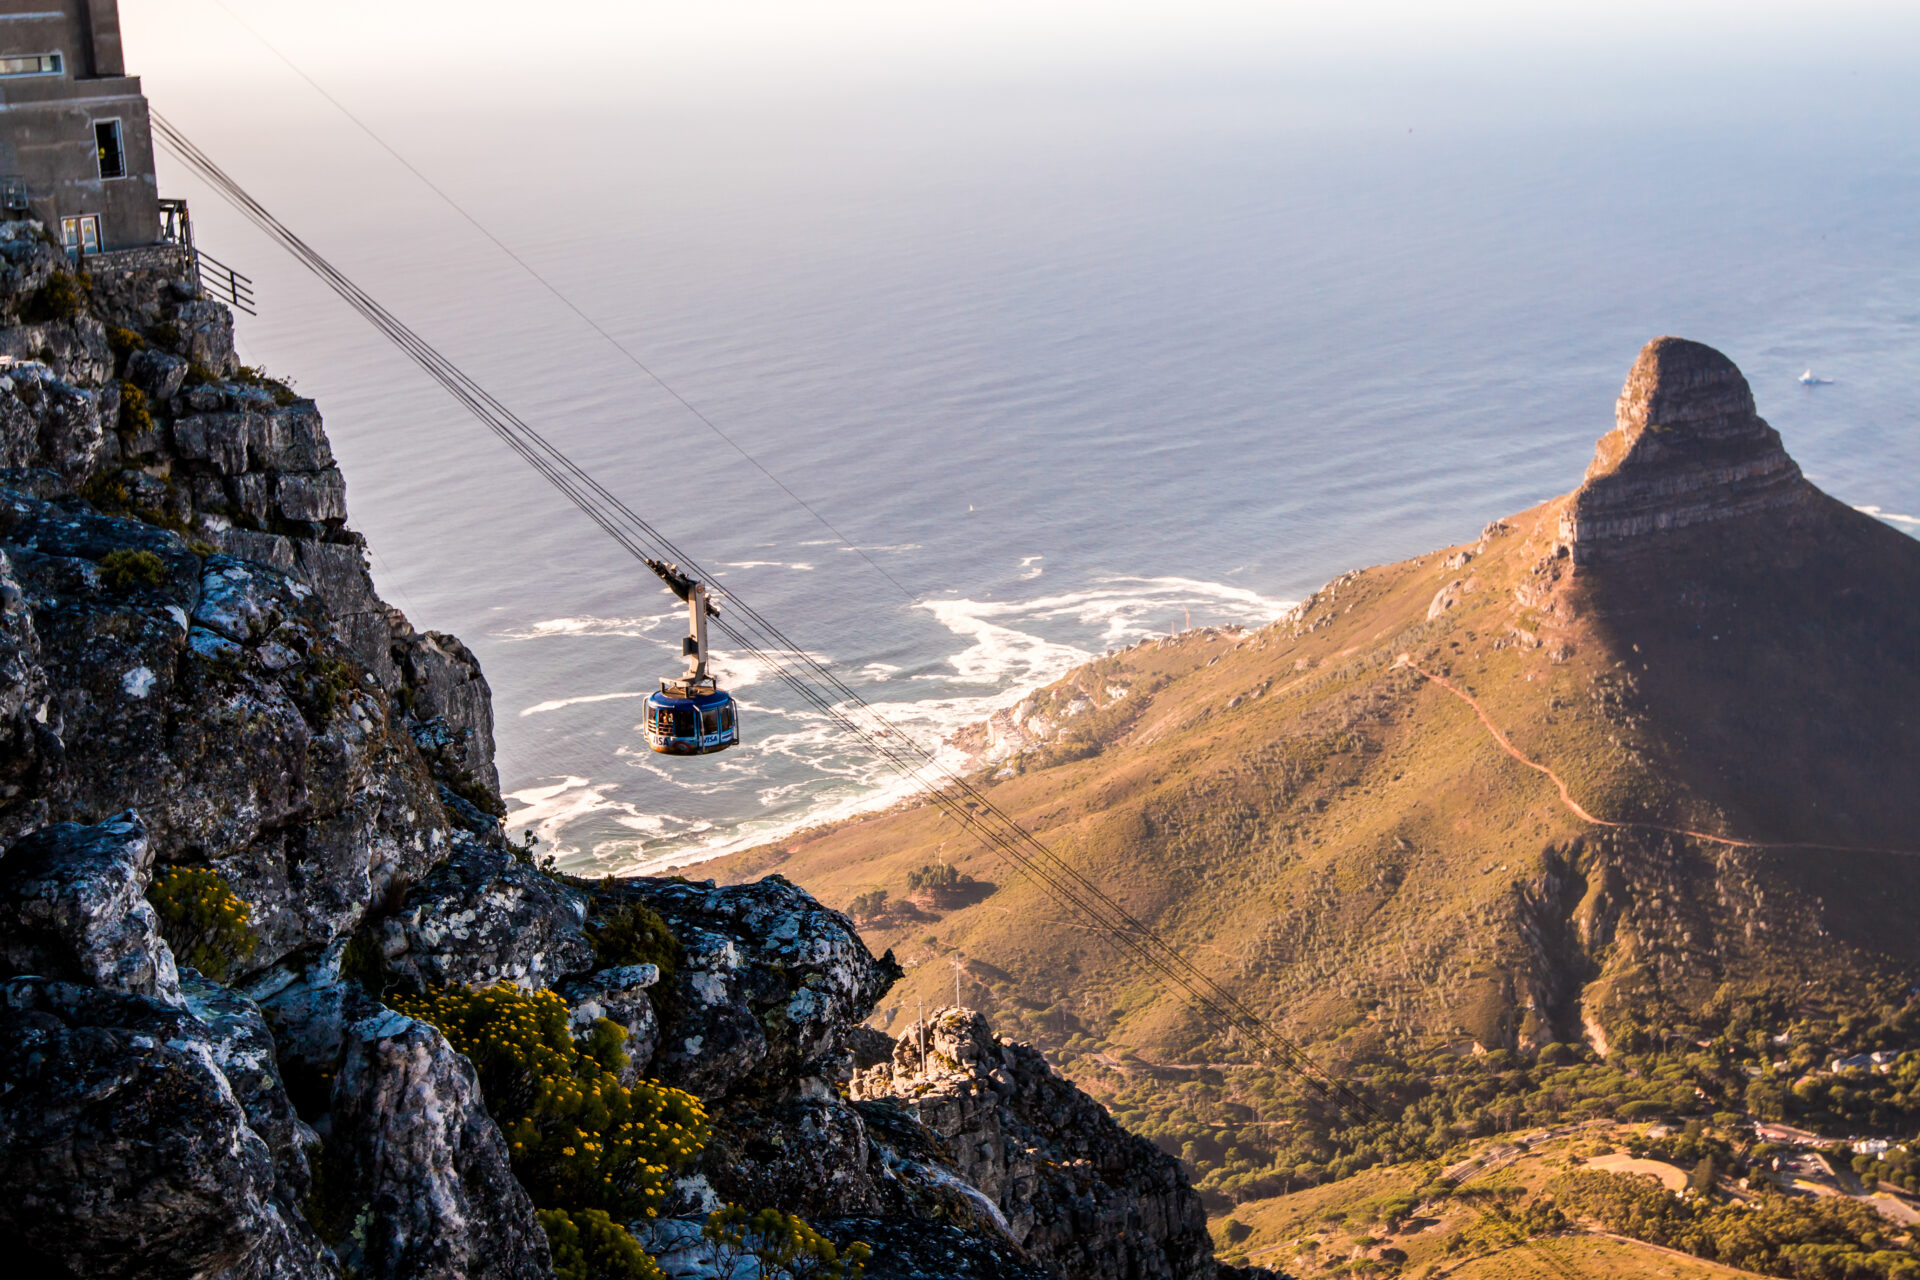 Table Mountain Cableway - one of the things to do in Cape Town with kids.